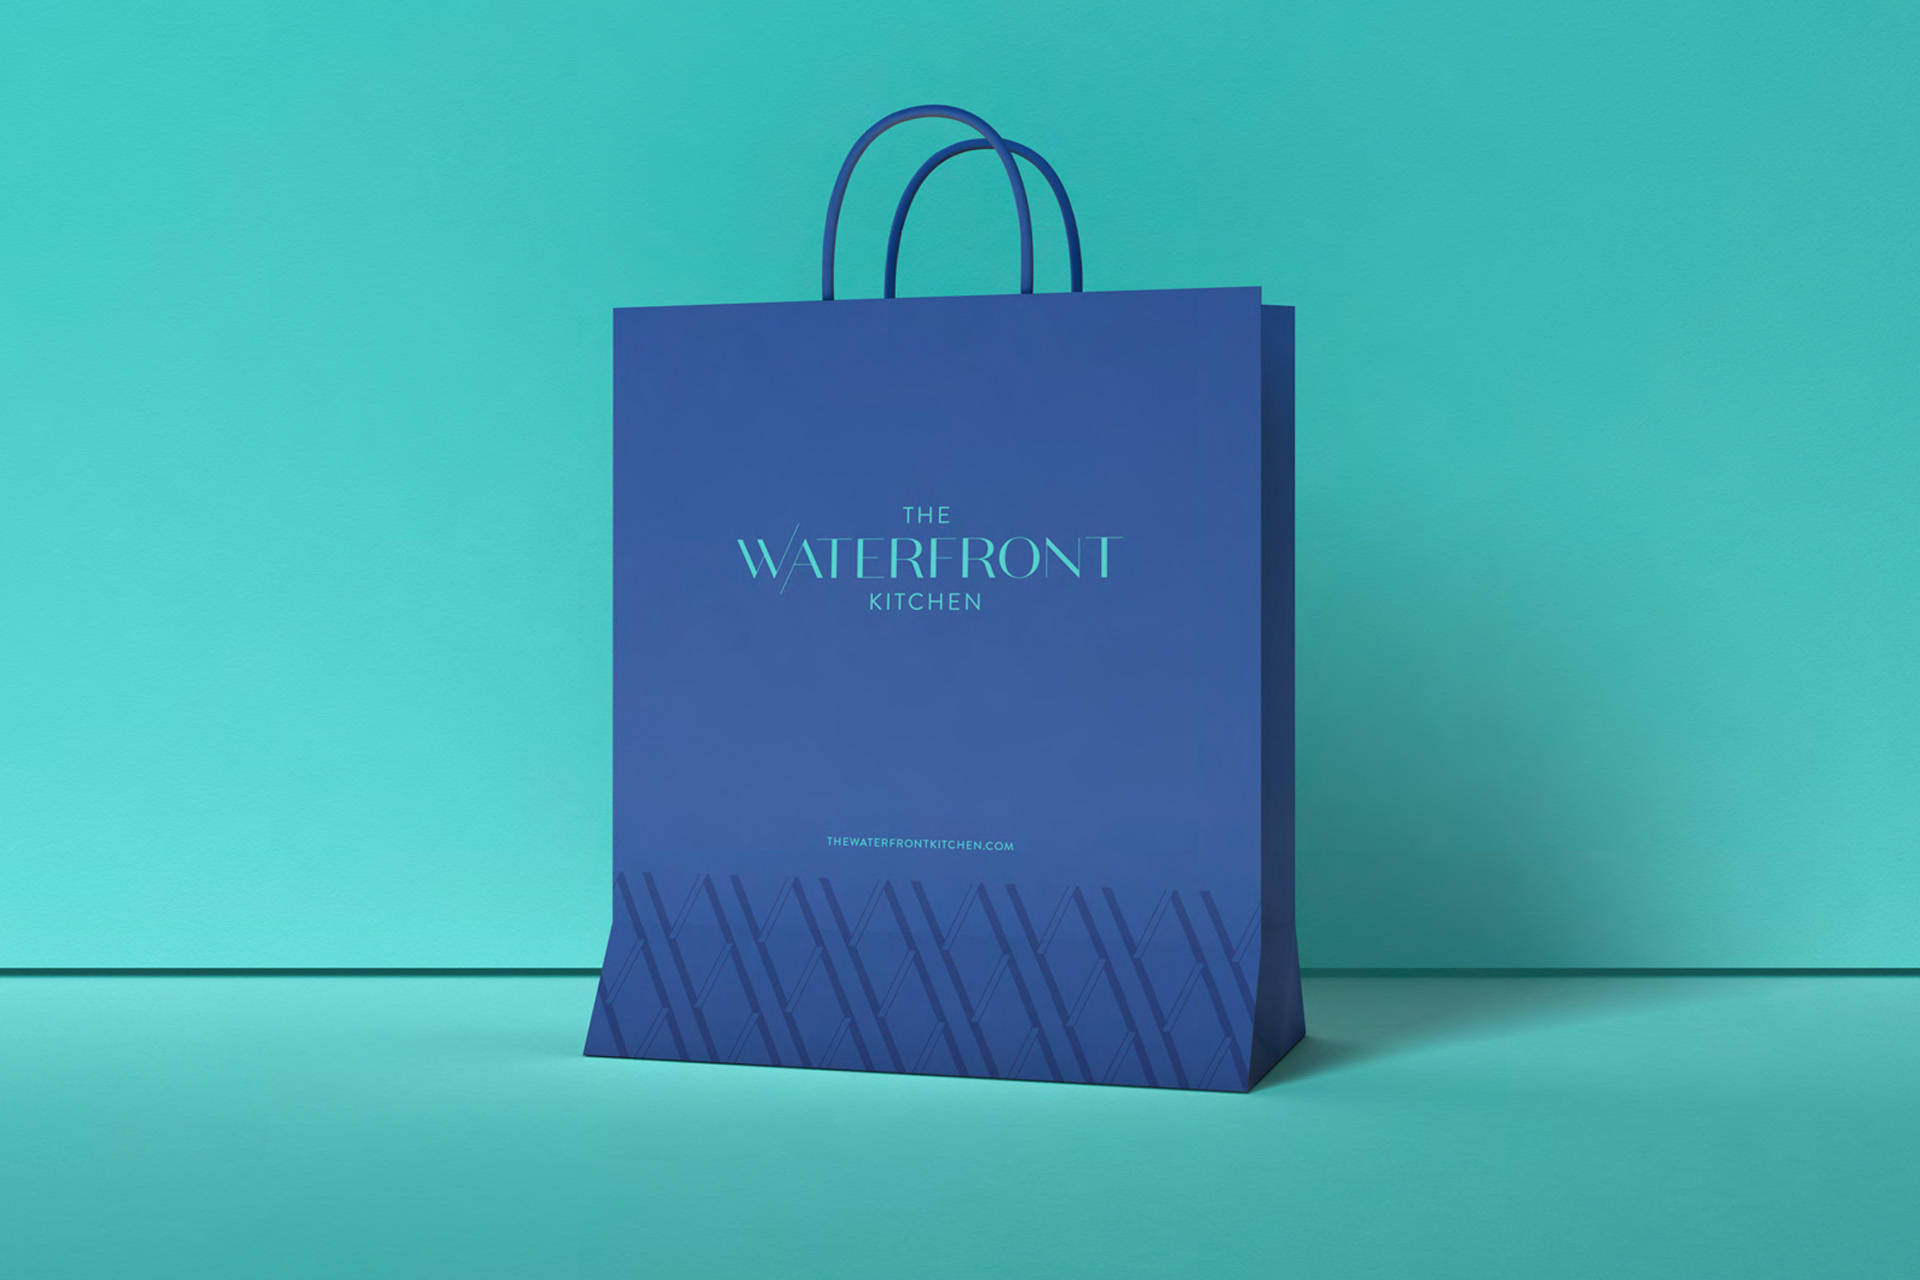 All Day Dining Outlet Takeaway Bag Design